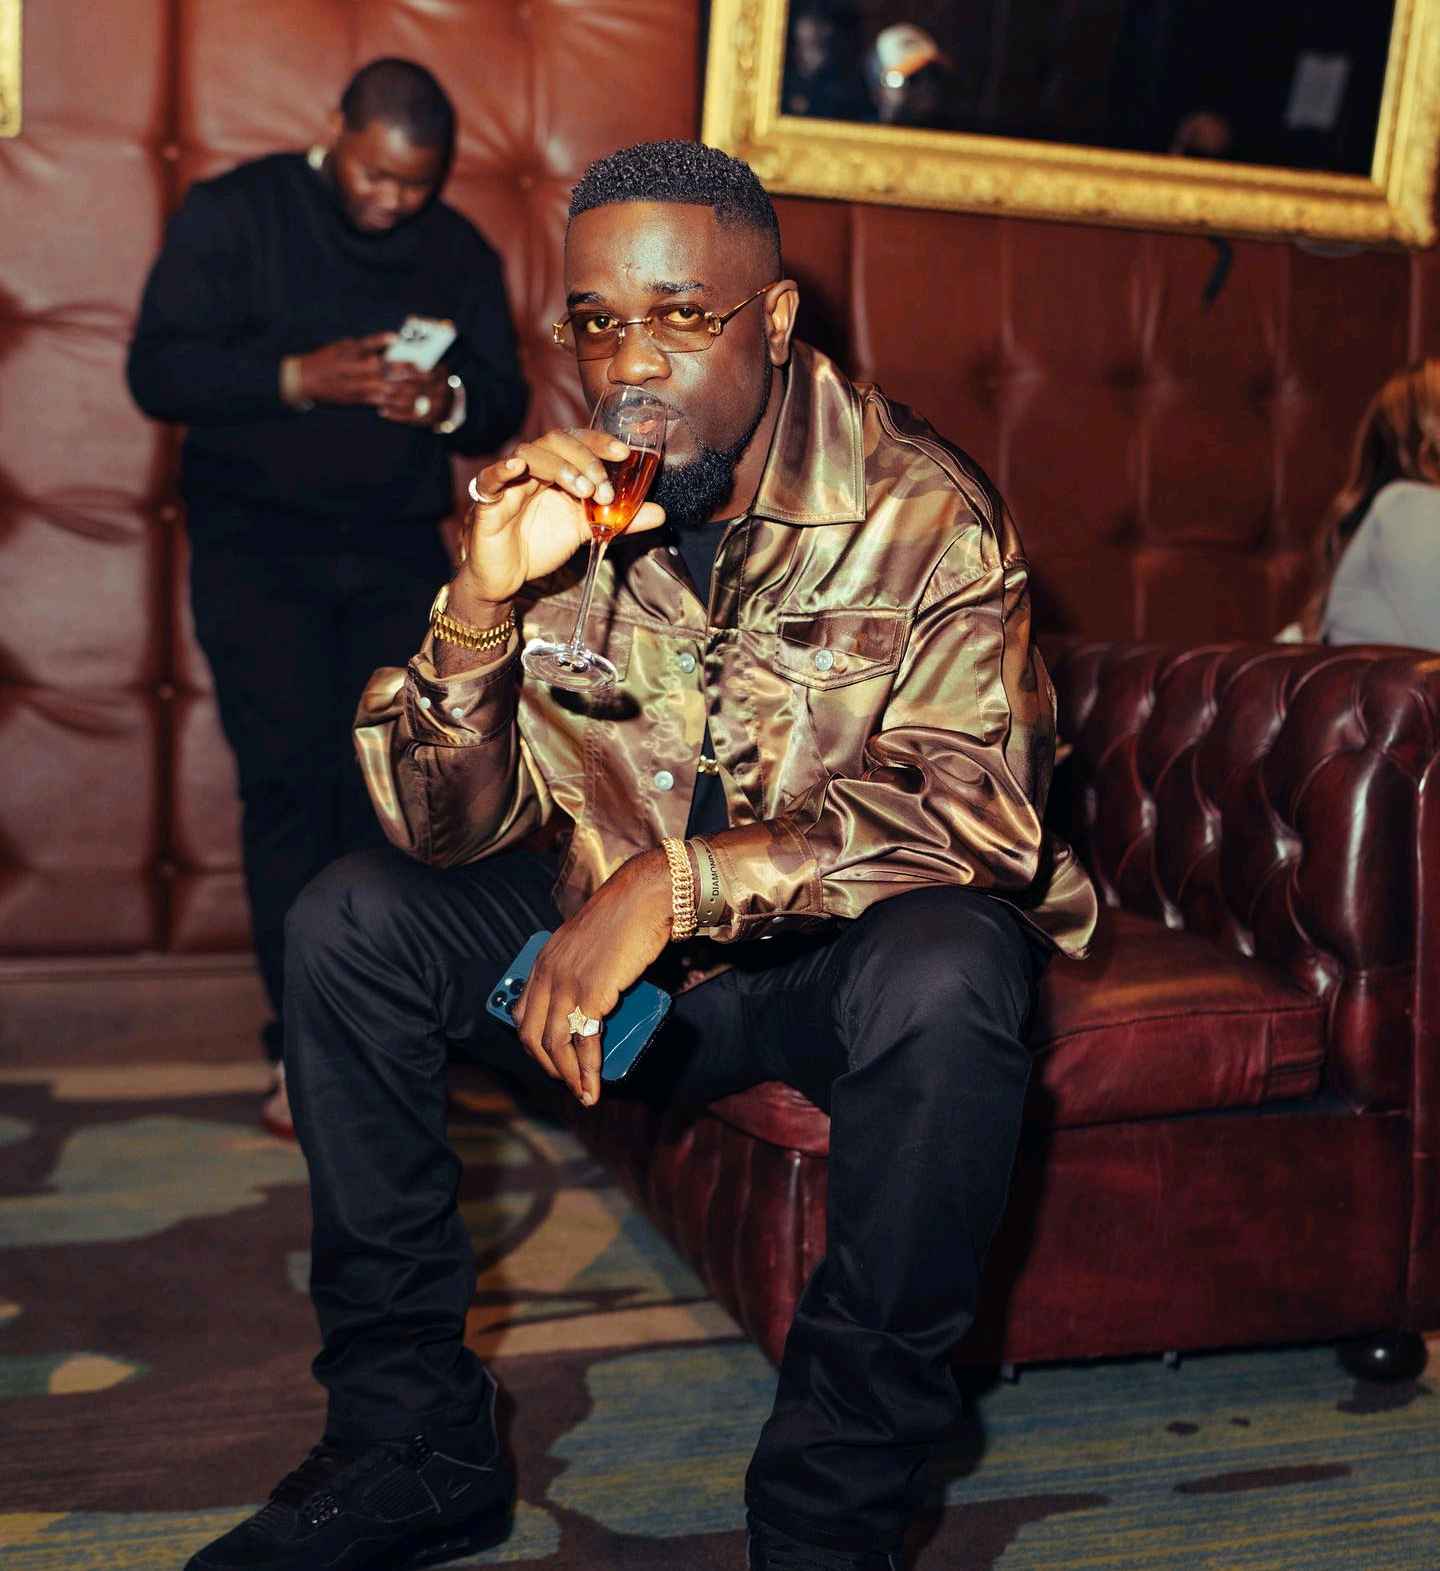 Check out below how Ghanaian musician "Sarkodie" has decided to welcome critics